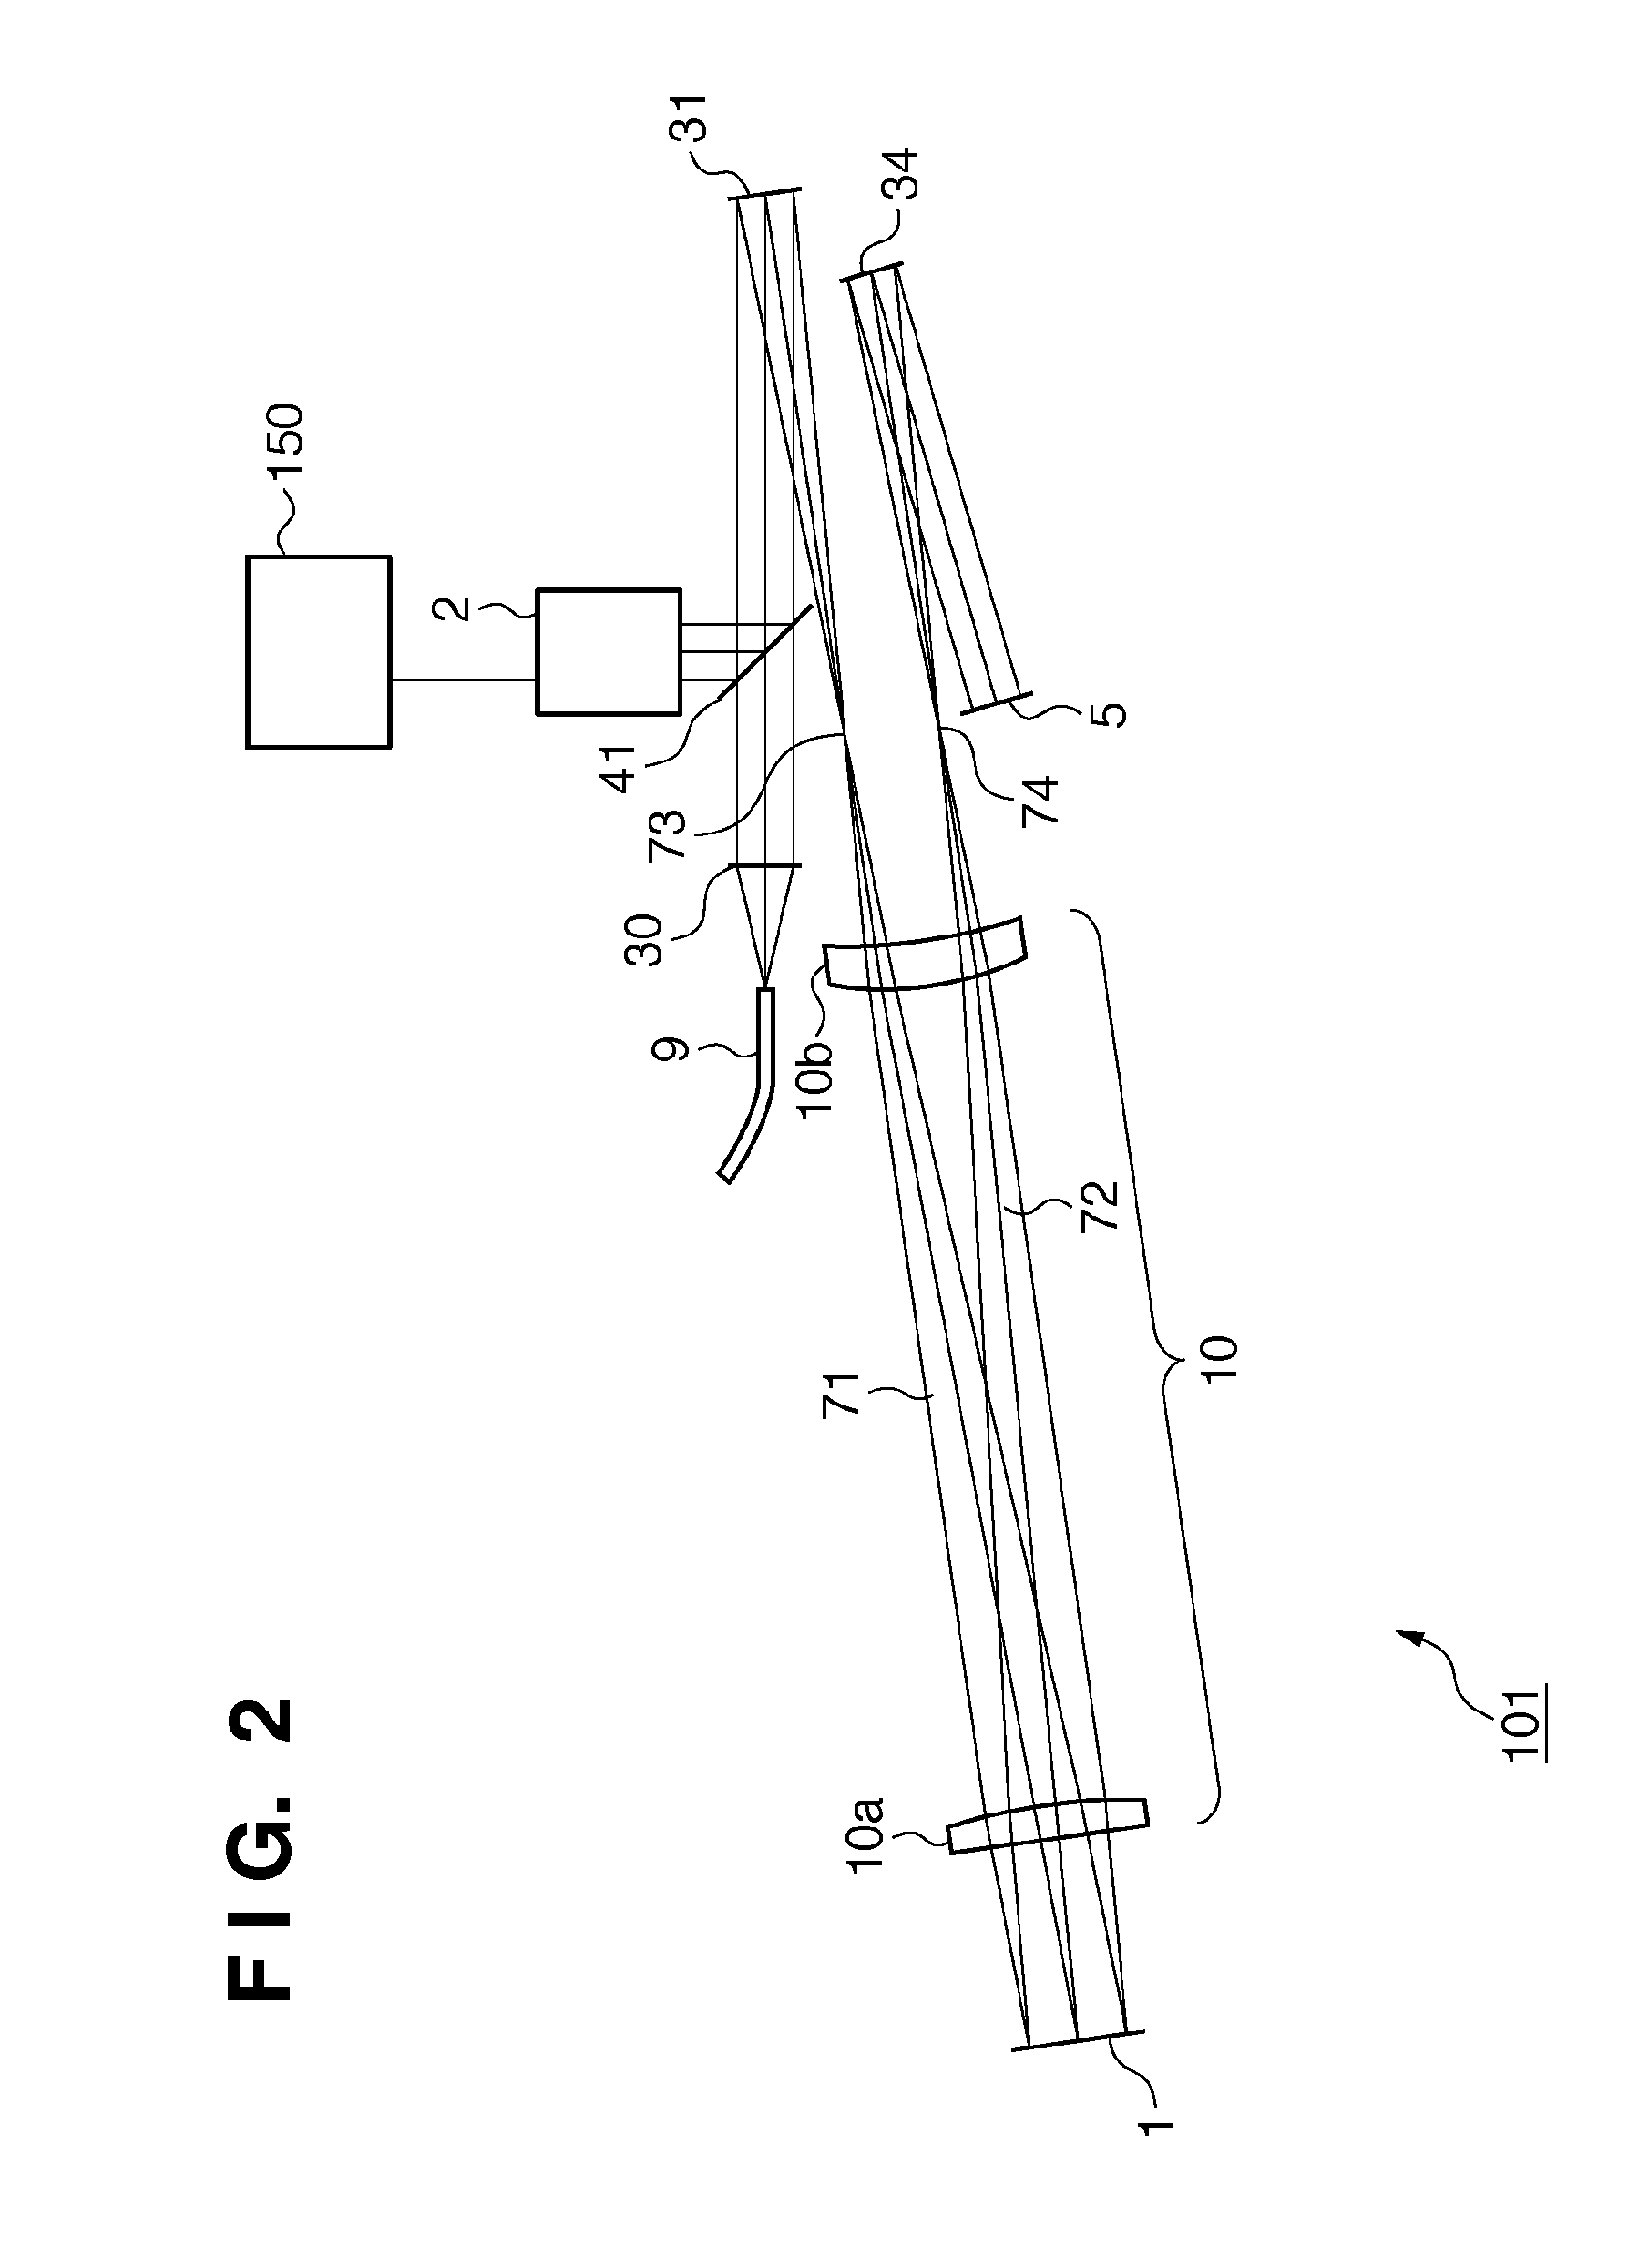 Ophthalmic apparatus, adaptive optical system, and image generating apparatus